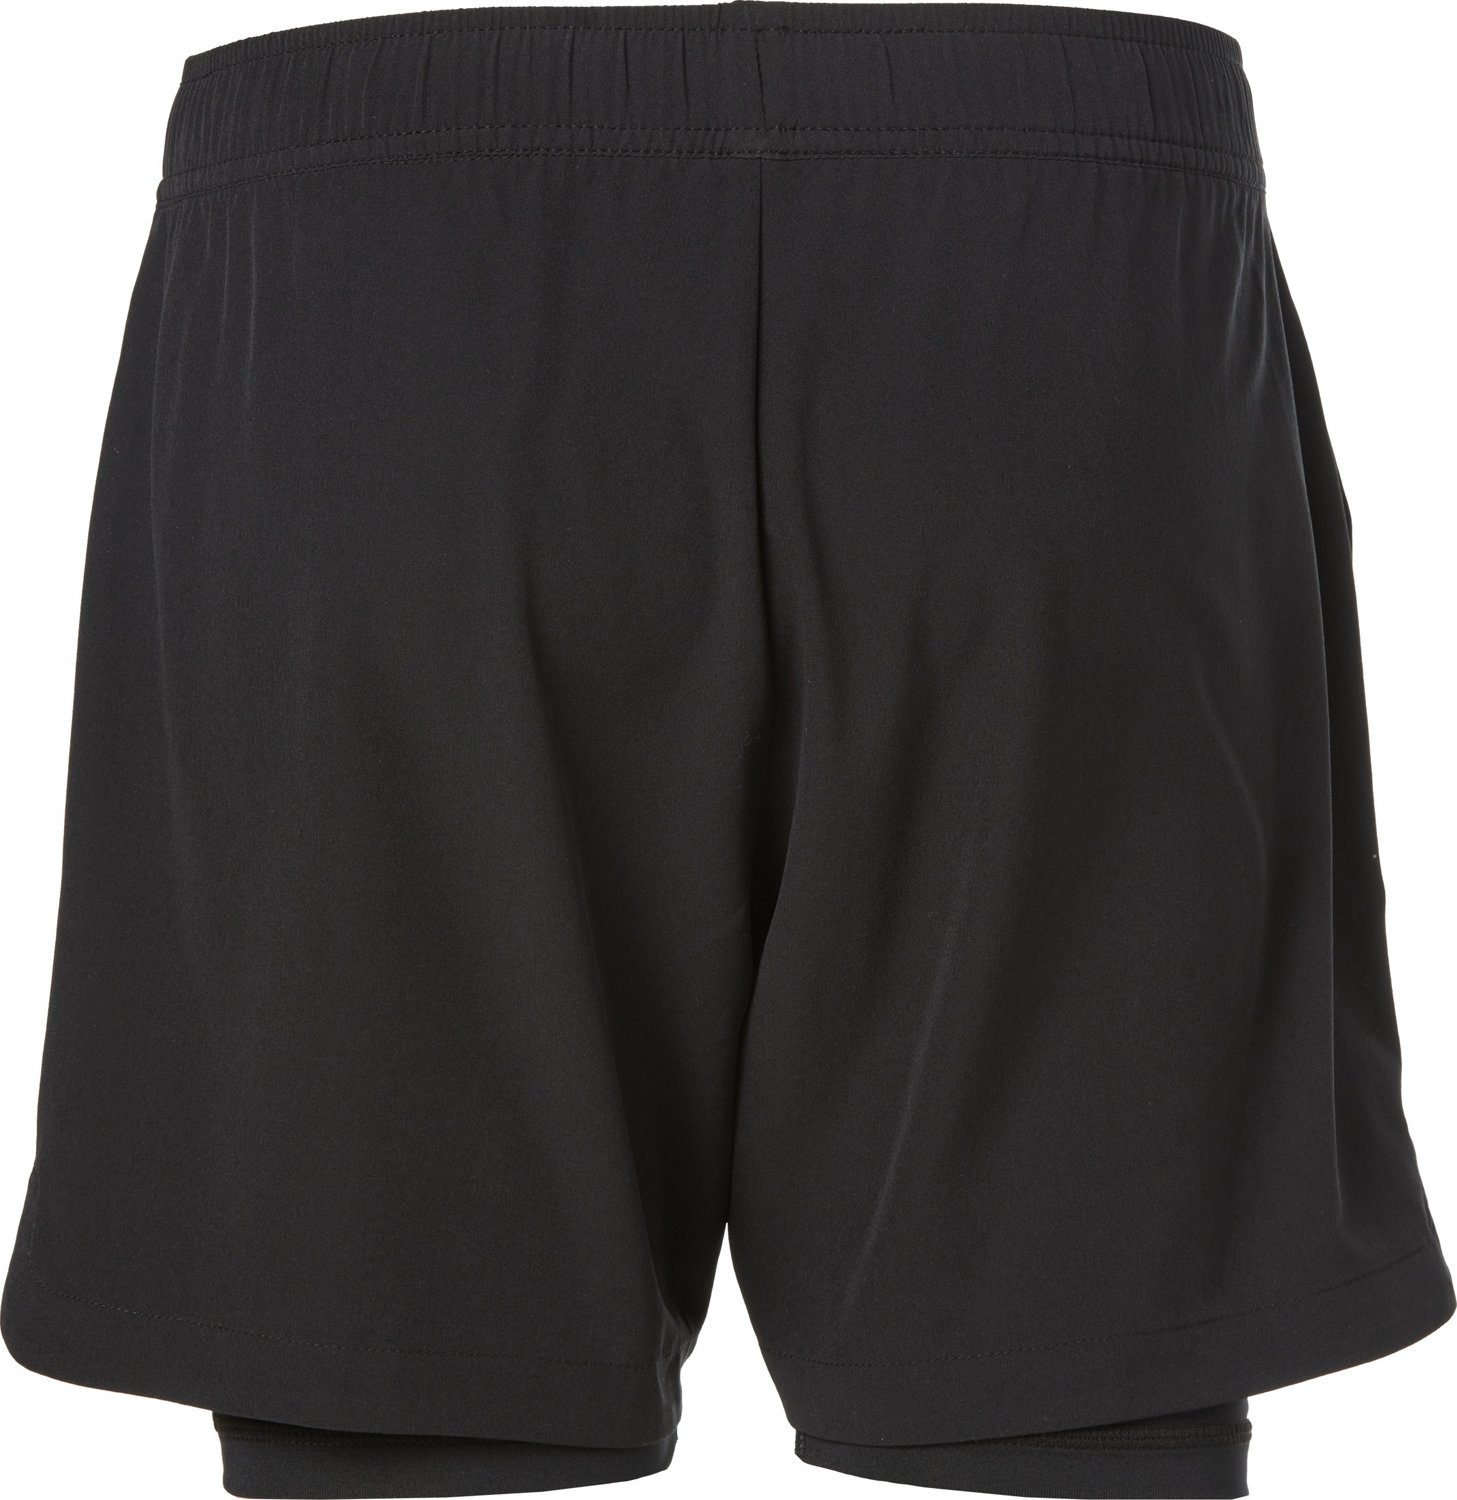 BCG Boys' 2 in 1 Shorts  Free Shipping at Academy